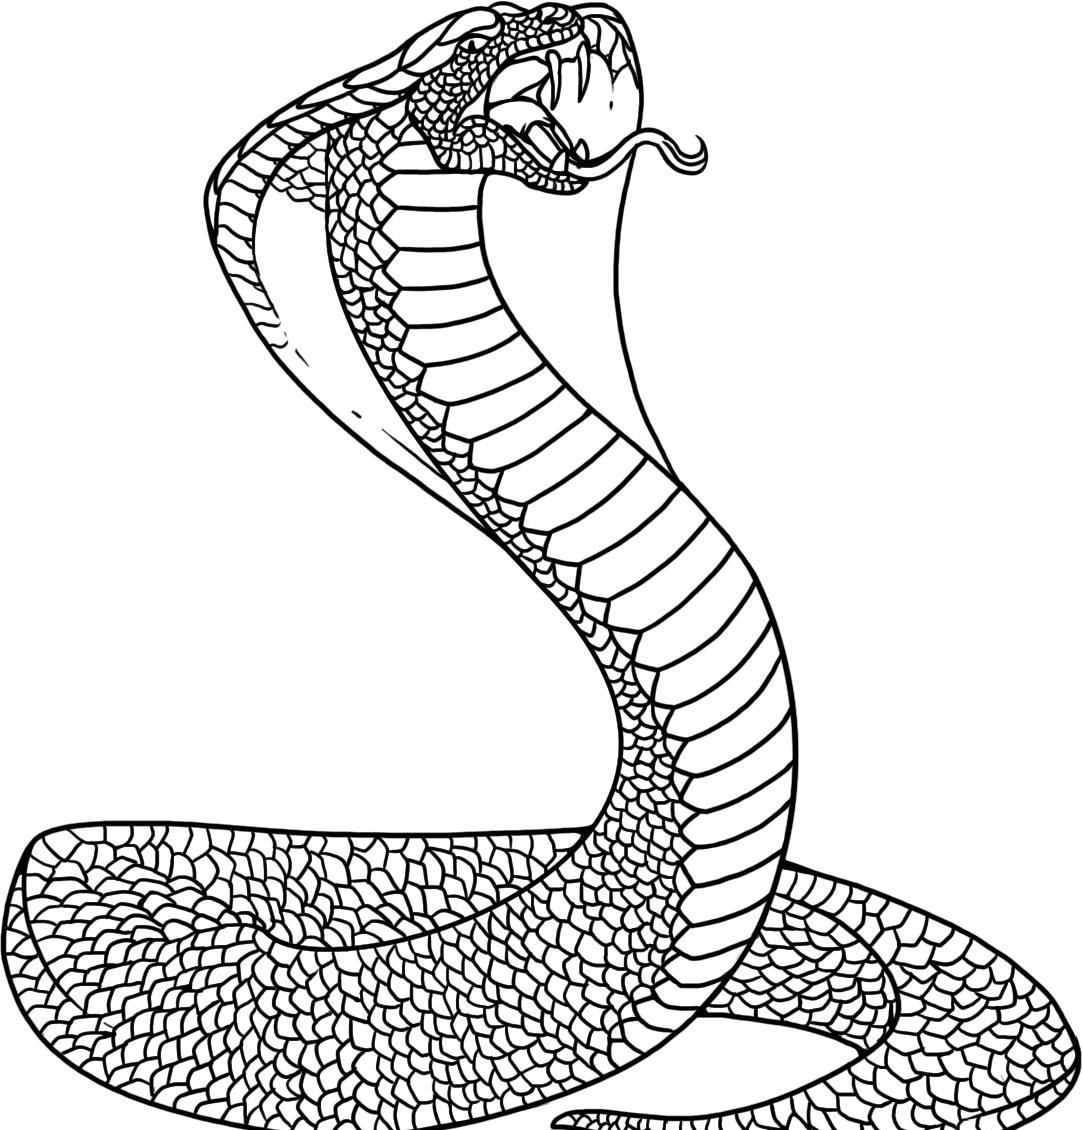 let-s-revitalizing-snake-coloring-sheet-itching-to-face-your-giggle